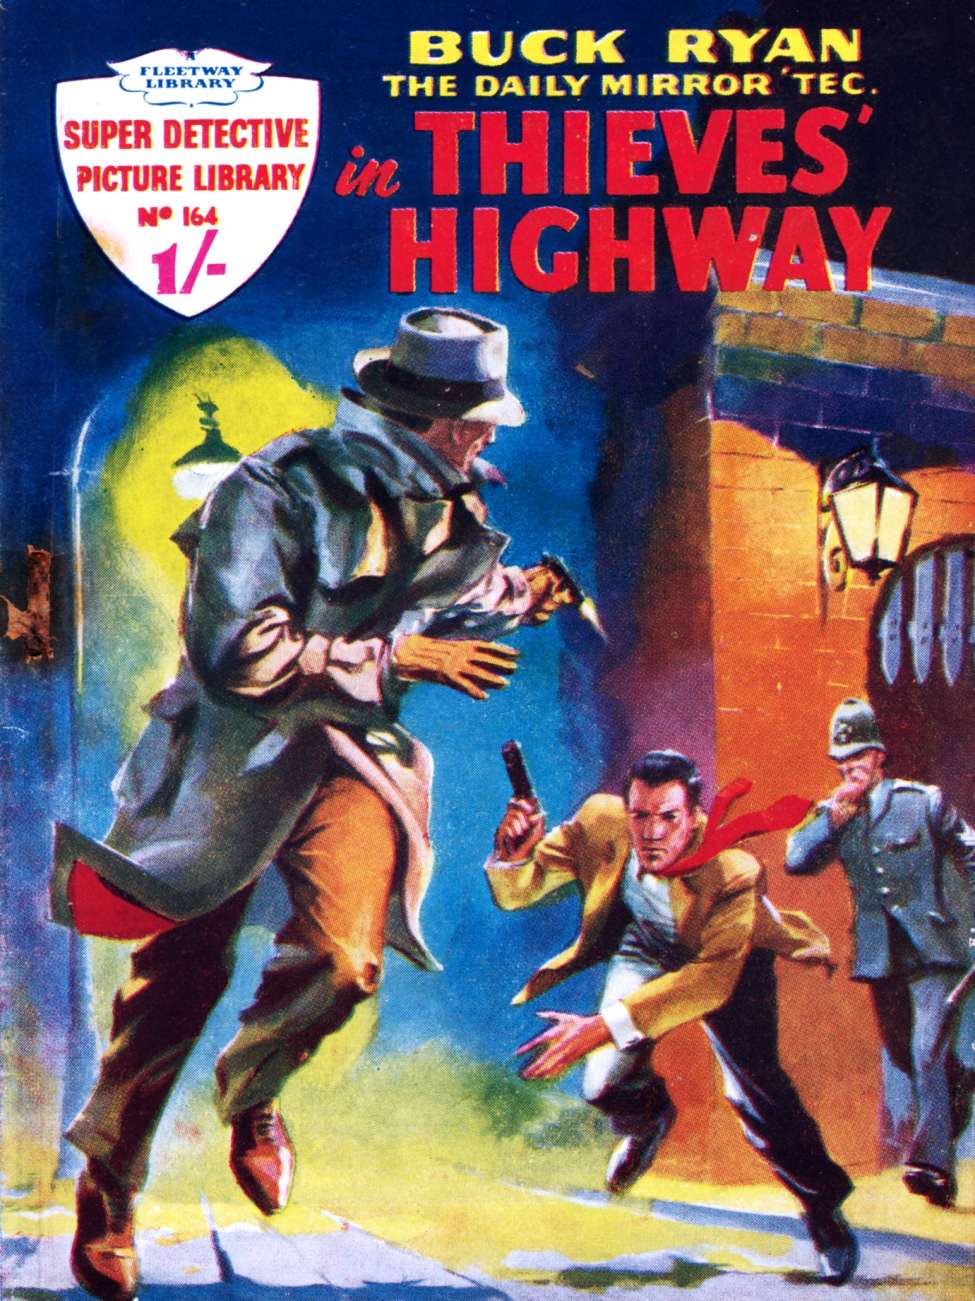 Book Cover For Super Detective Library 164 - Buck Ryan in Thieves Highway